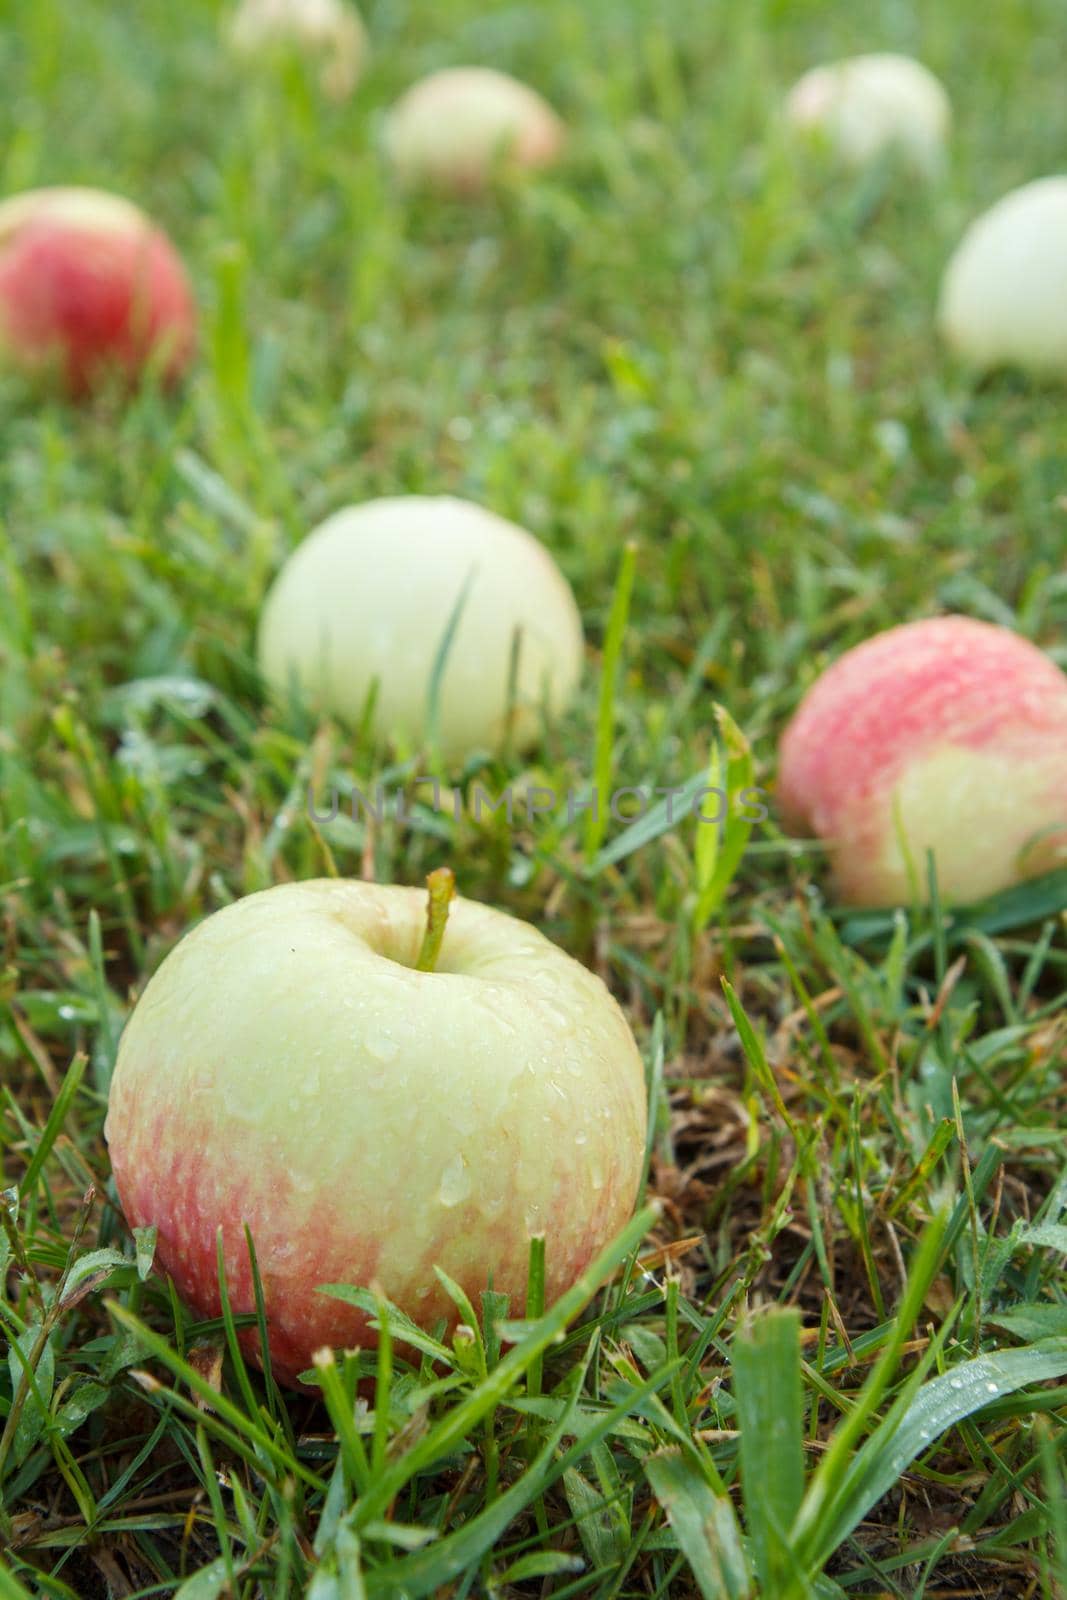 Close-up of red ripe apple on green grass in the garden. Fallen ripe apples in the summer orchard. Shallow depth of field. Focus on the apple.